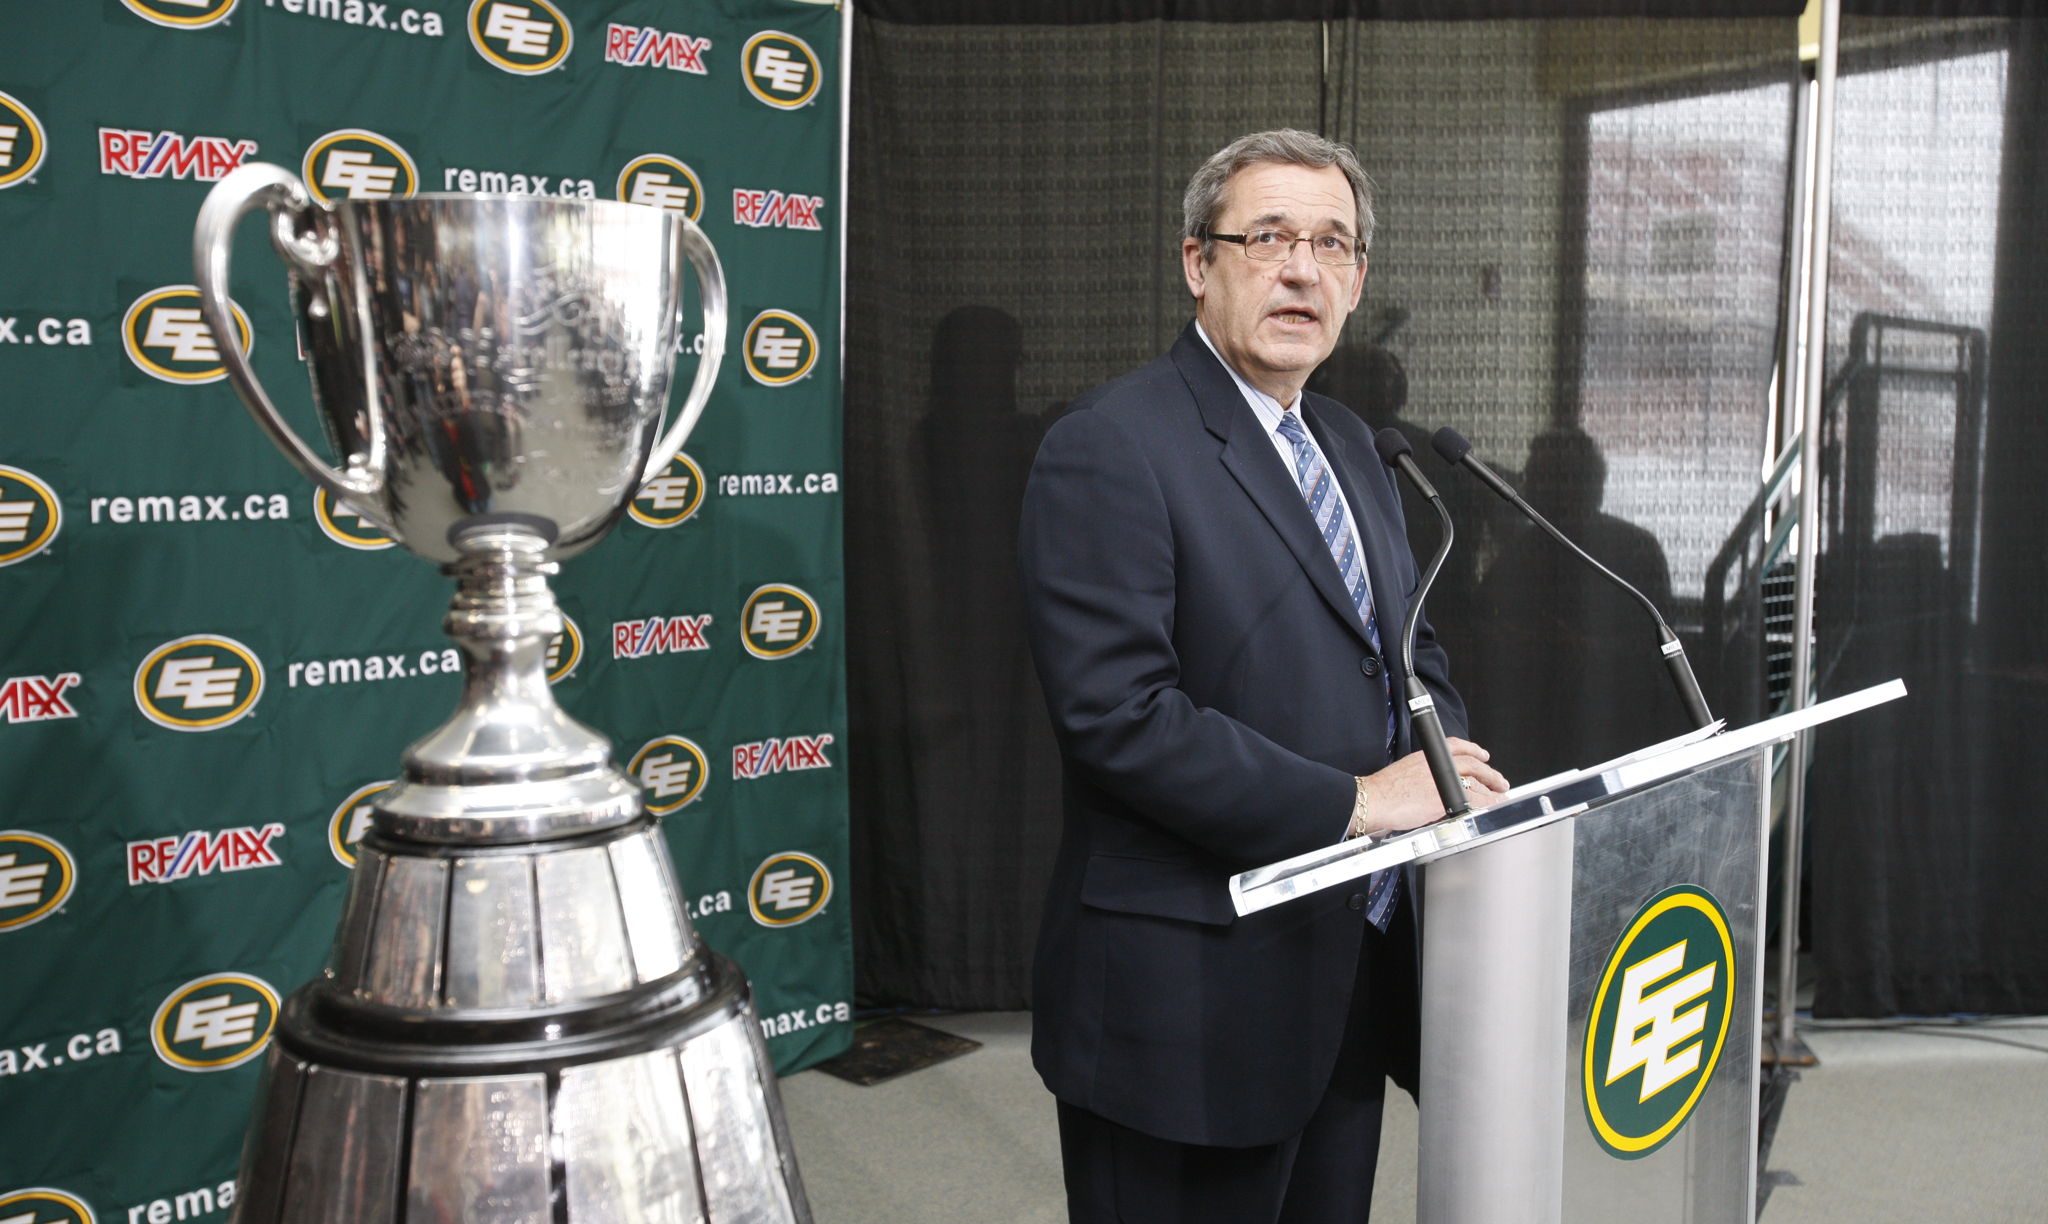 Rick LeLacheur announcing the 2010 Grey Cup Festival during his first tenure as President and CEO for the Green and Gold. LeLacheur oversaw both the 2002 and 2010 Grey Cup Festivals hosted in Edmonton.